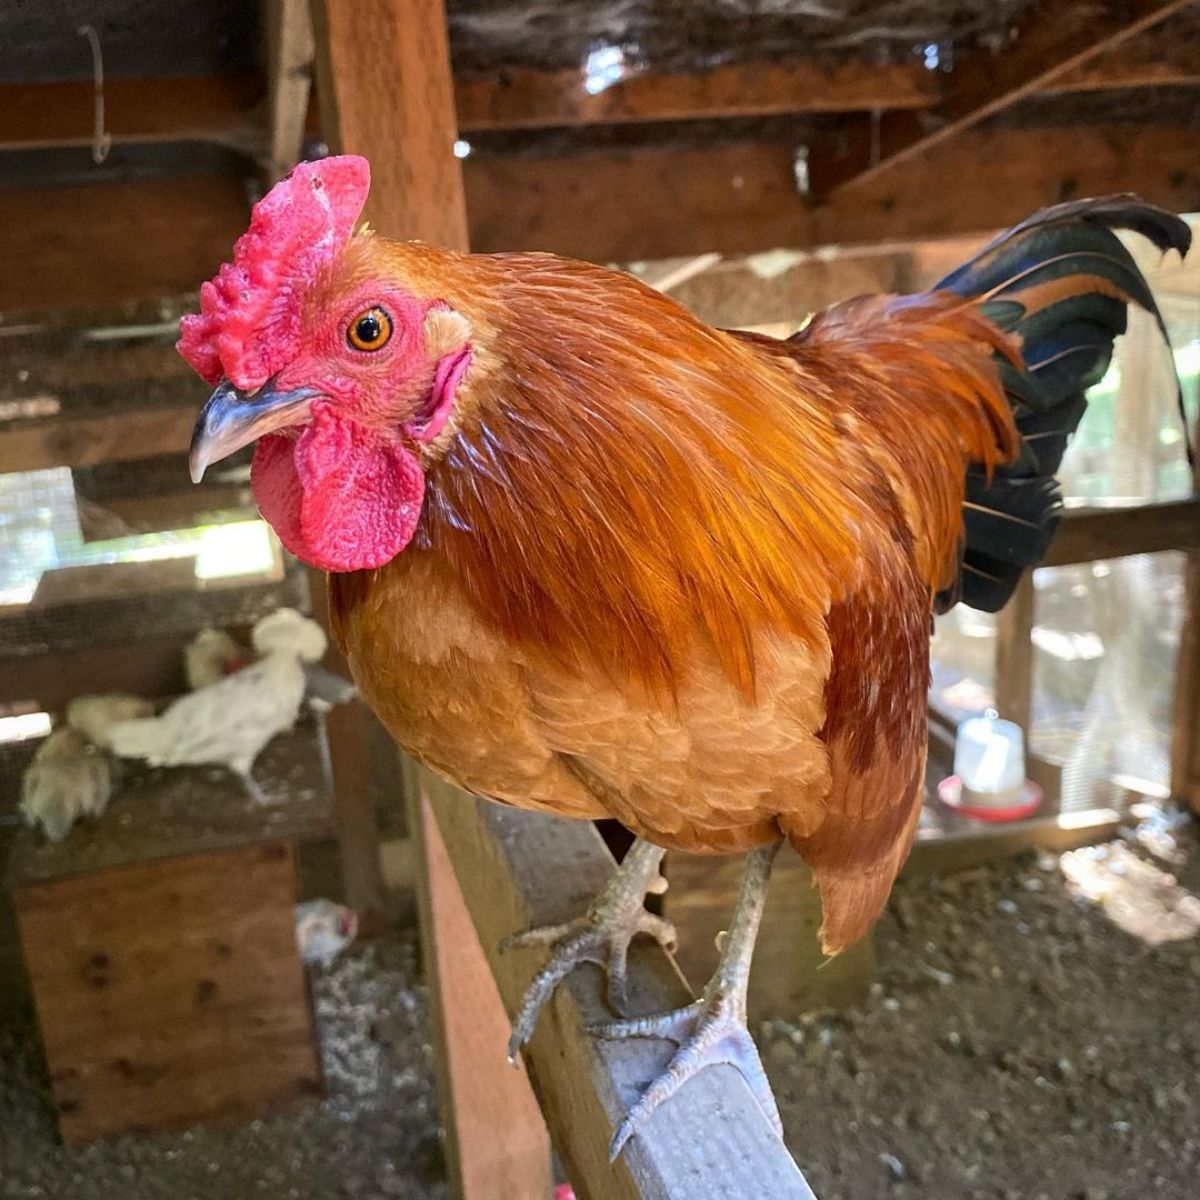 Adorable Nankin rooster perched on a wooden board in a chicken coop.